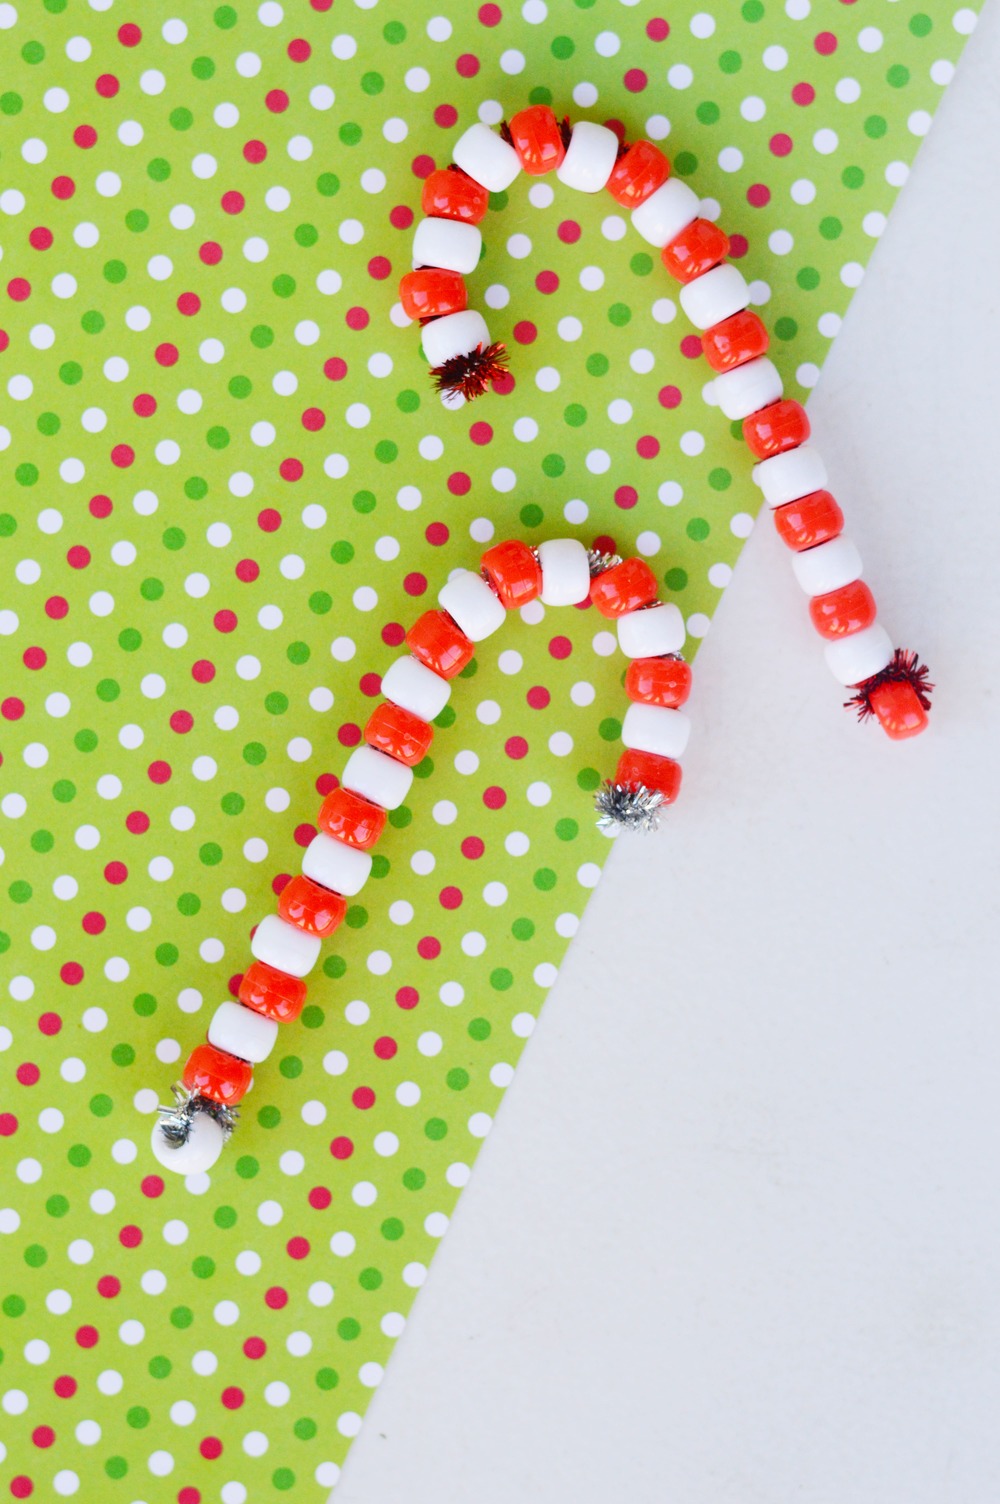 How to Make Pipe Cleaner Candy Canes